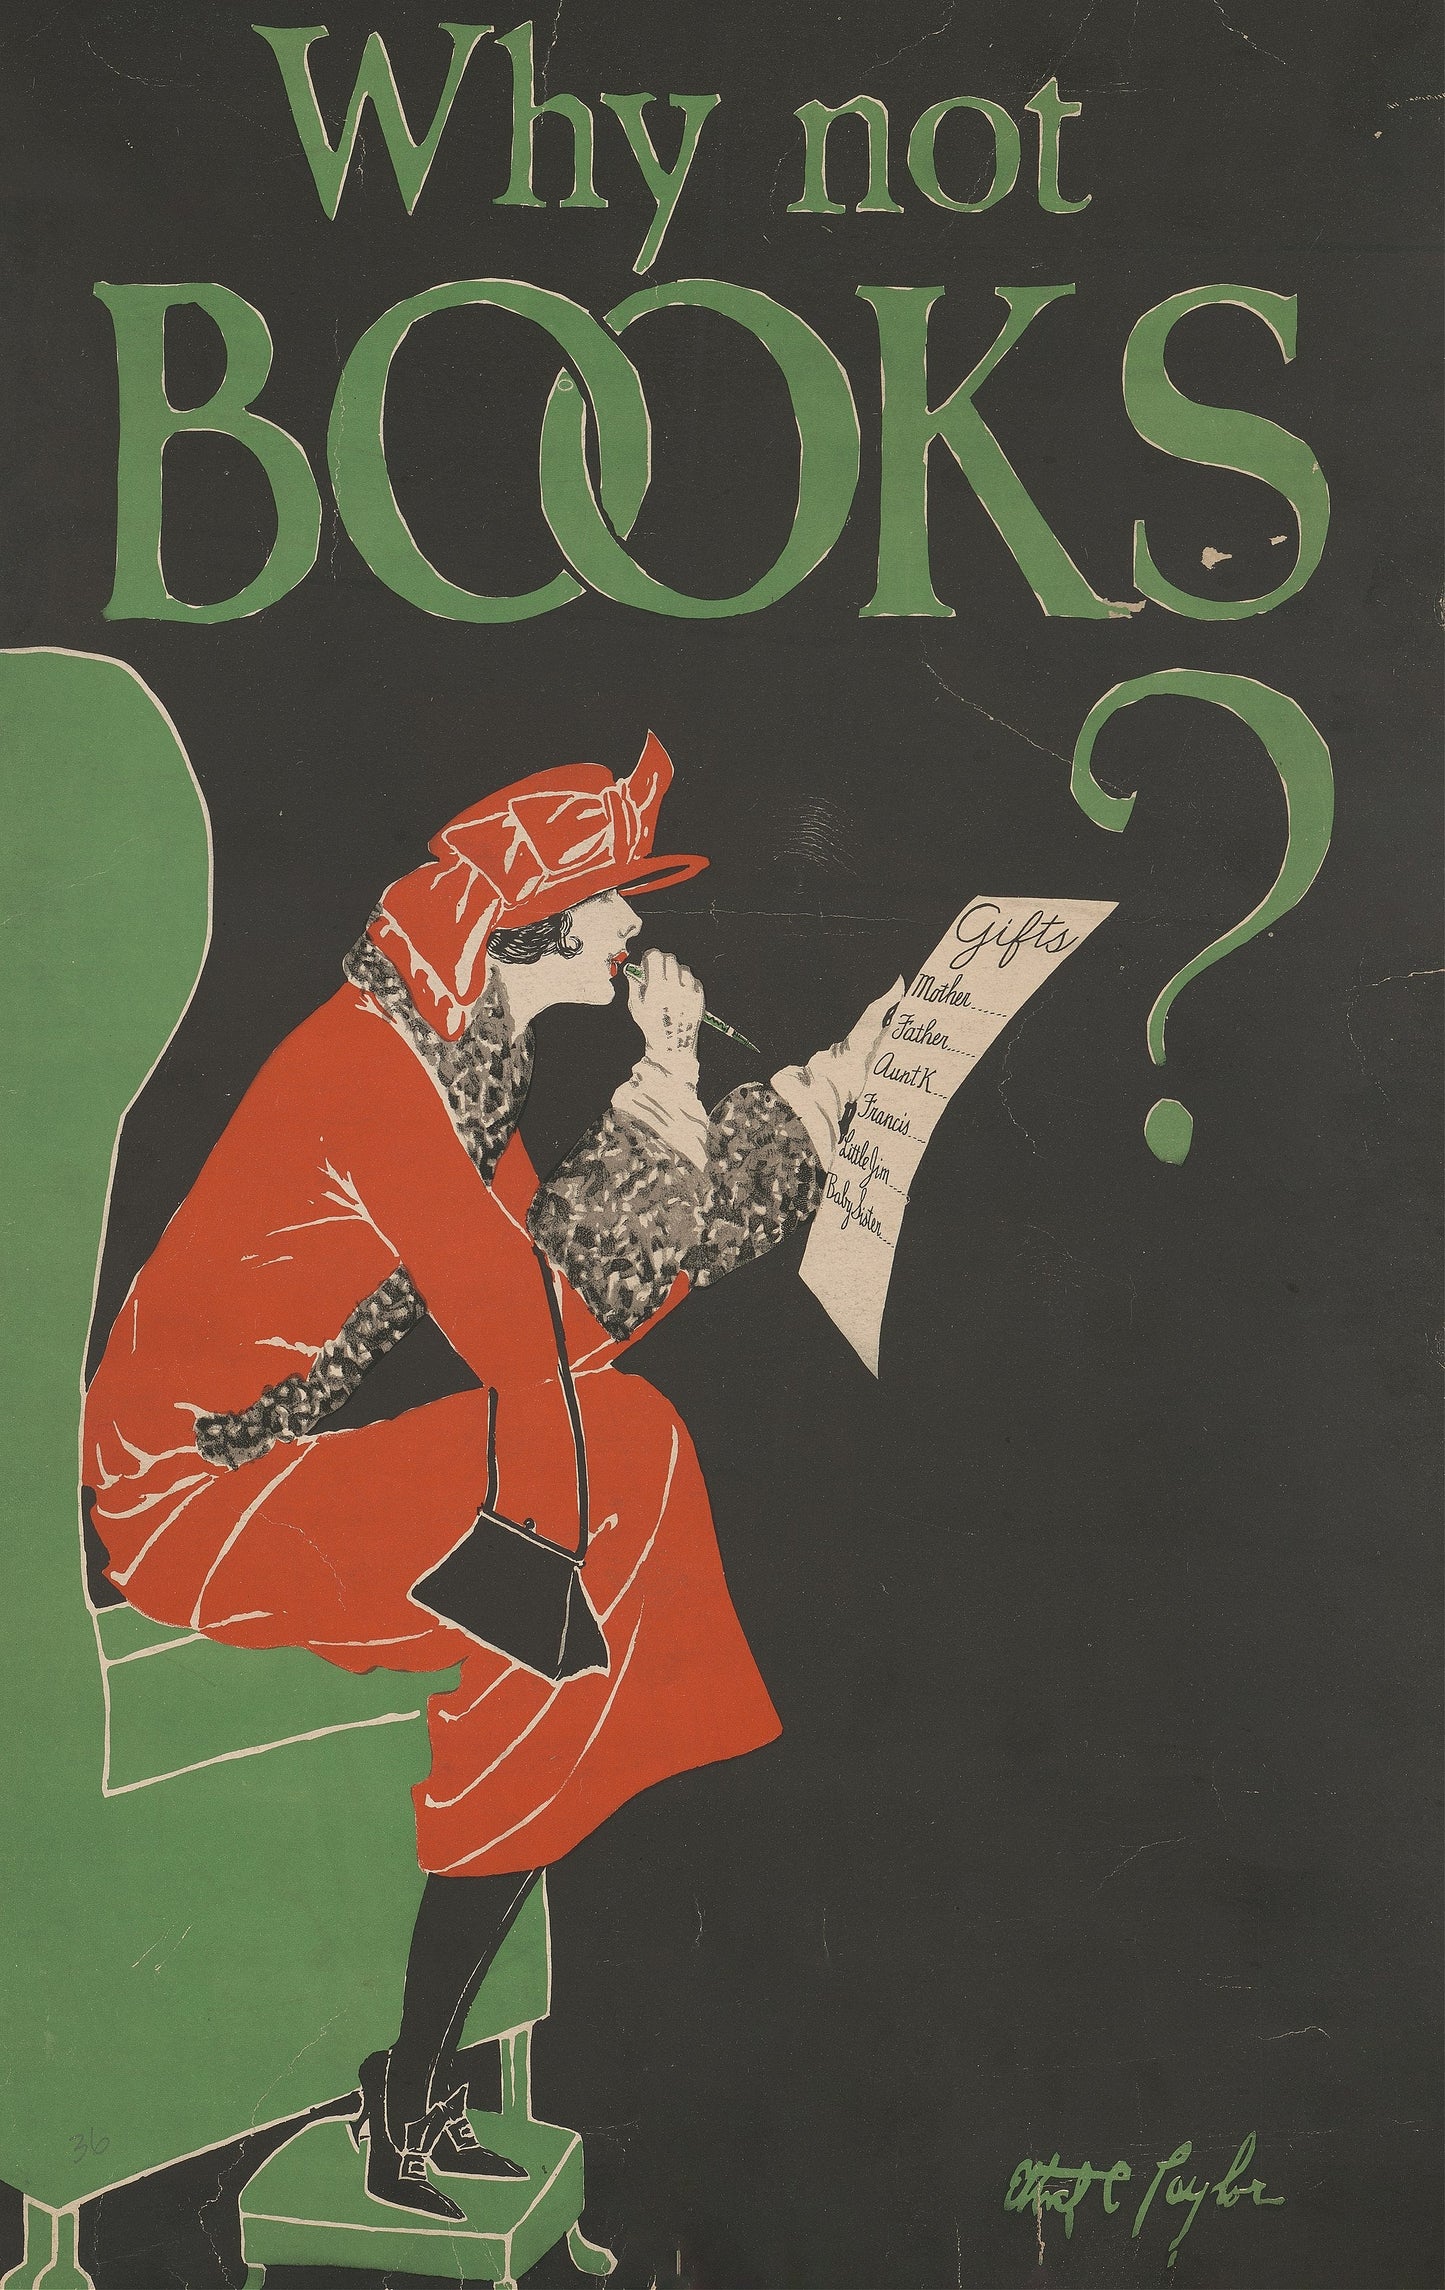 “Why not books?” poster art print (c1920s) | Ethel Taylor  The Trumpet Shop   